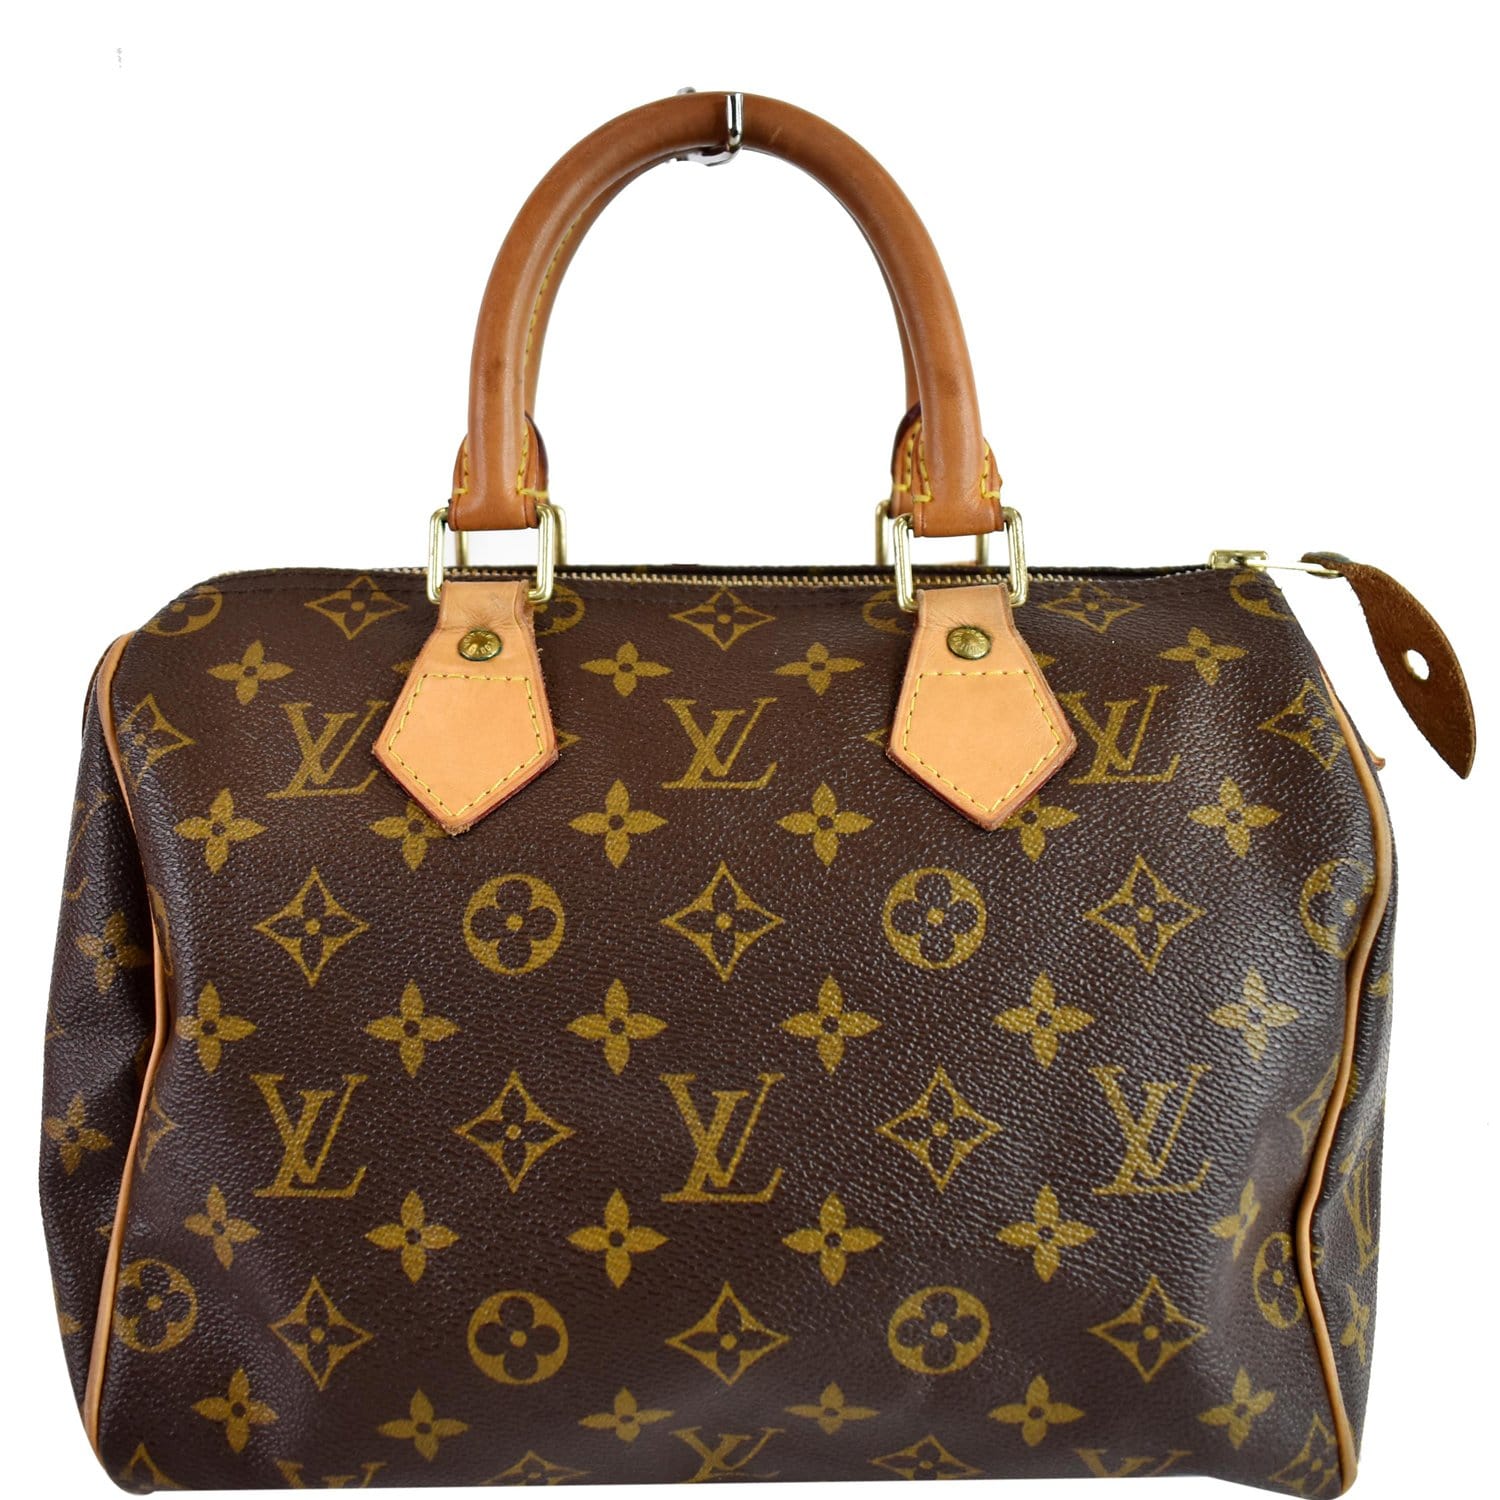 Louis Vuitton Monogram Bags With Special Design Are Available